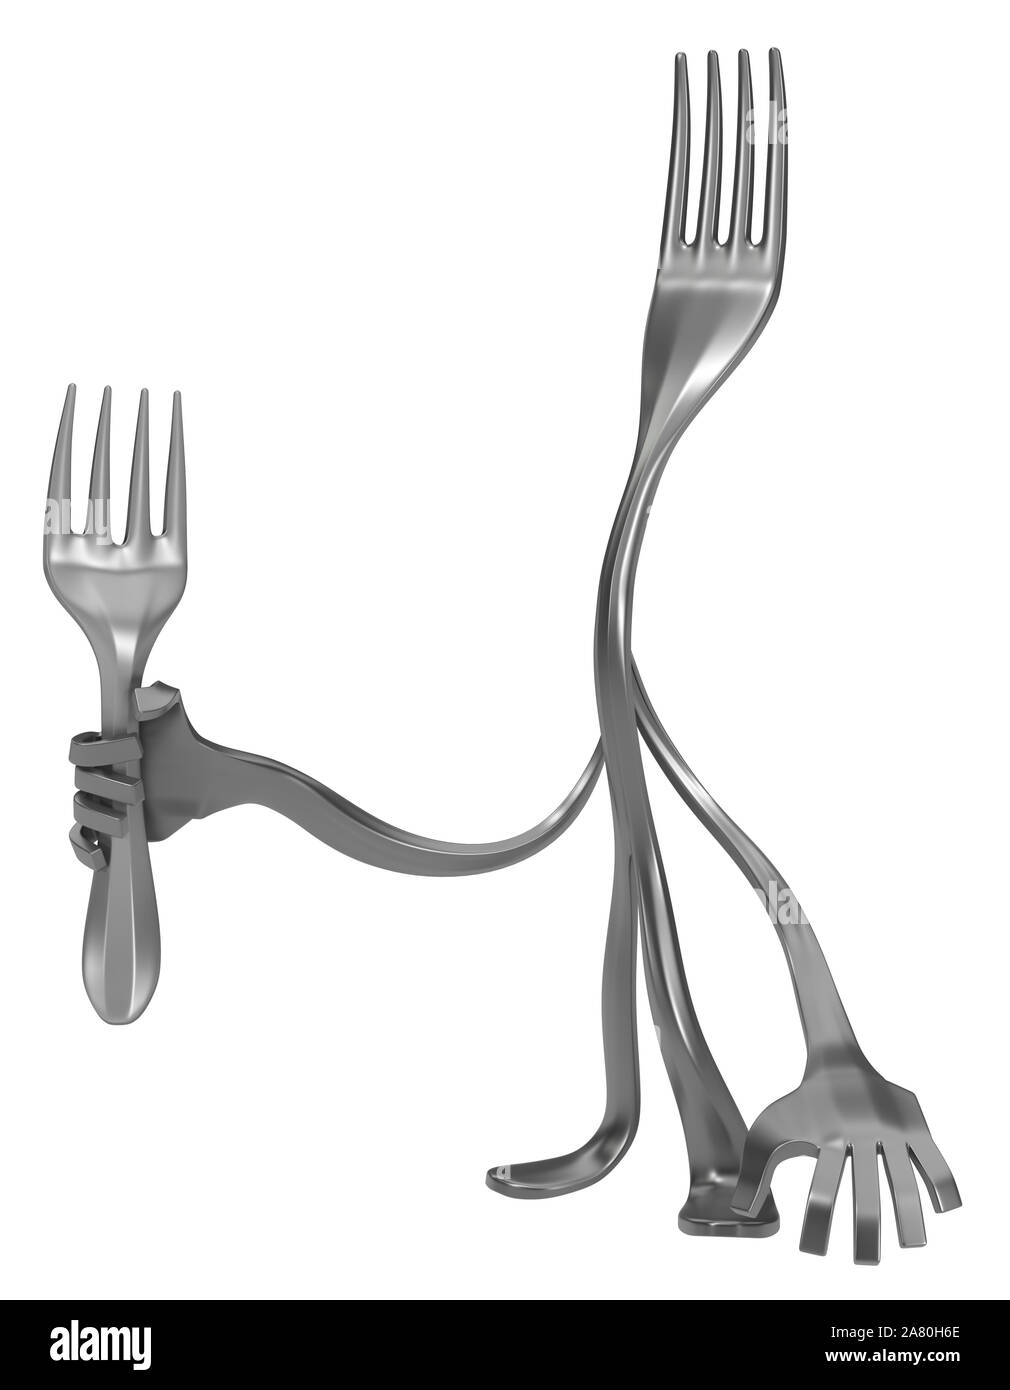 Fork cartoon character metal, with small fork tool, 3d illustration,  horizontal, isolated, over white Stock Photo - Alamy